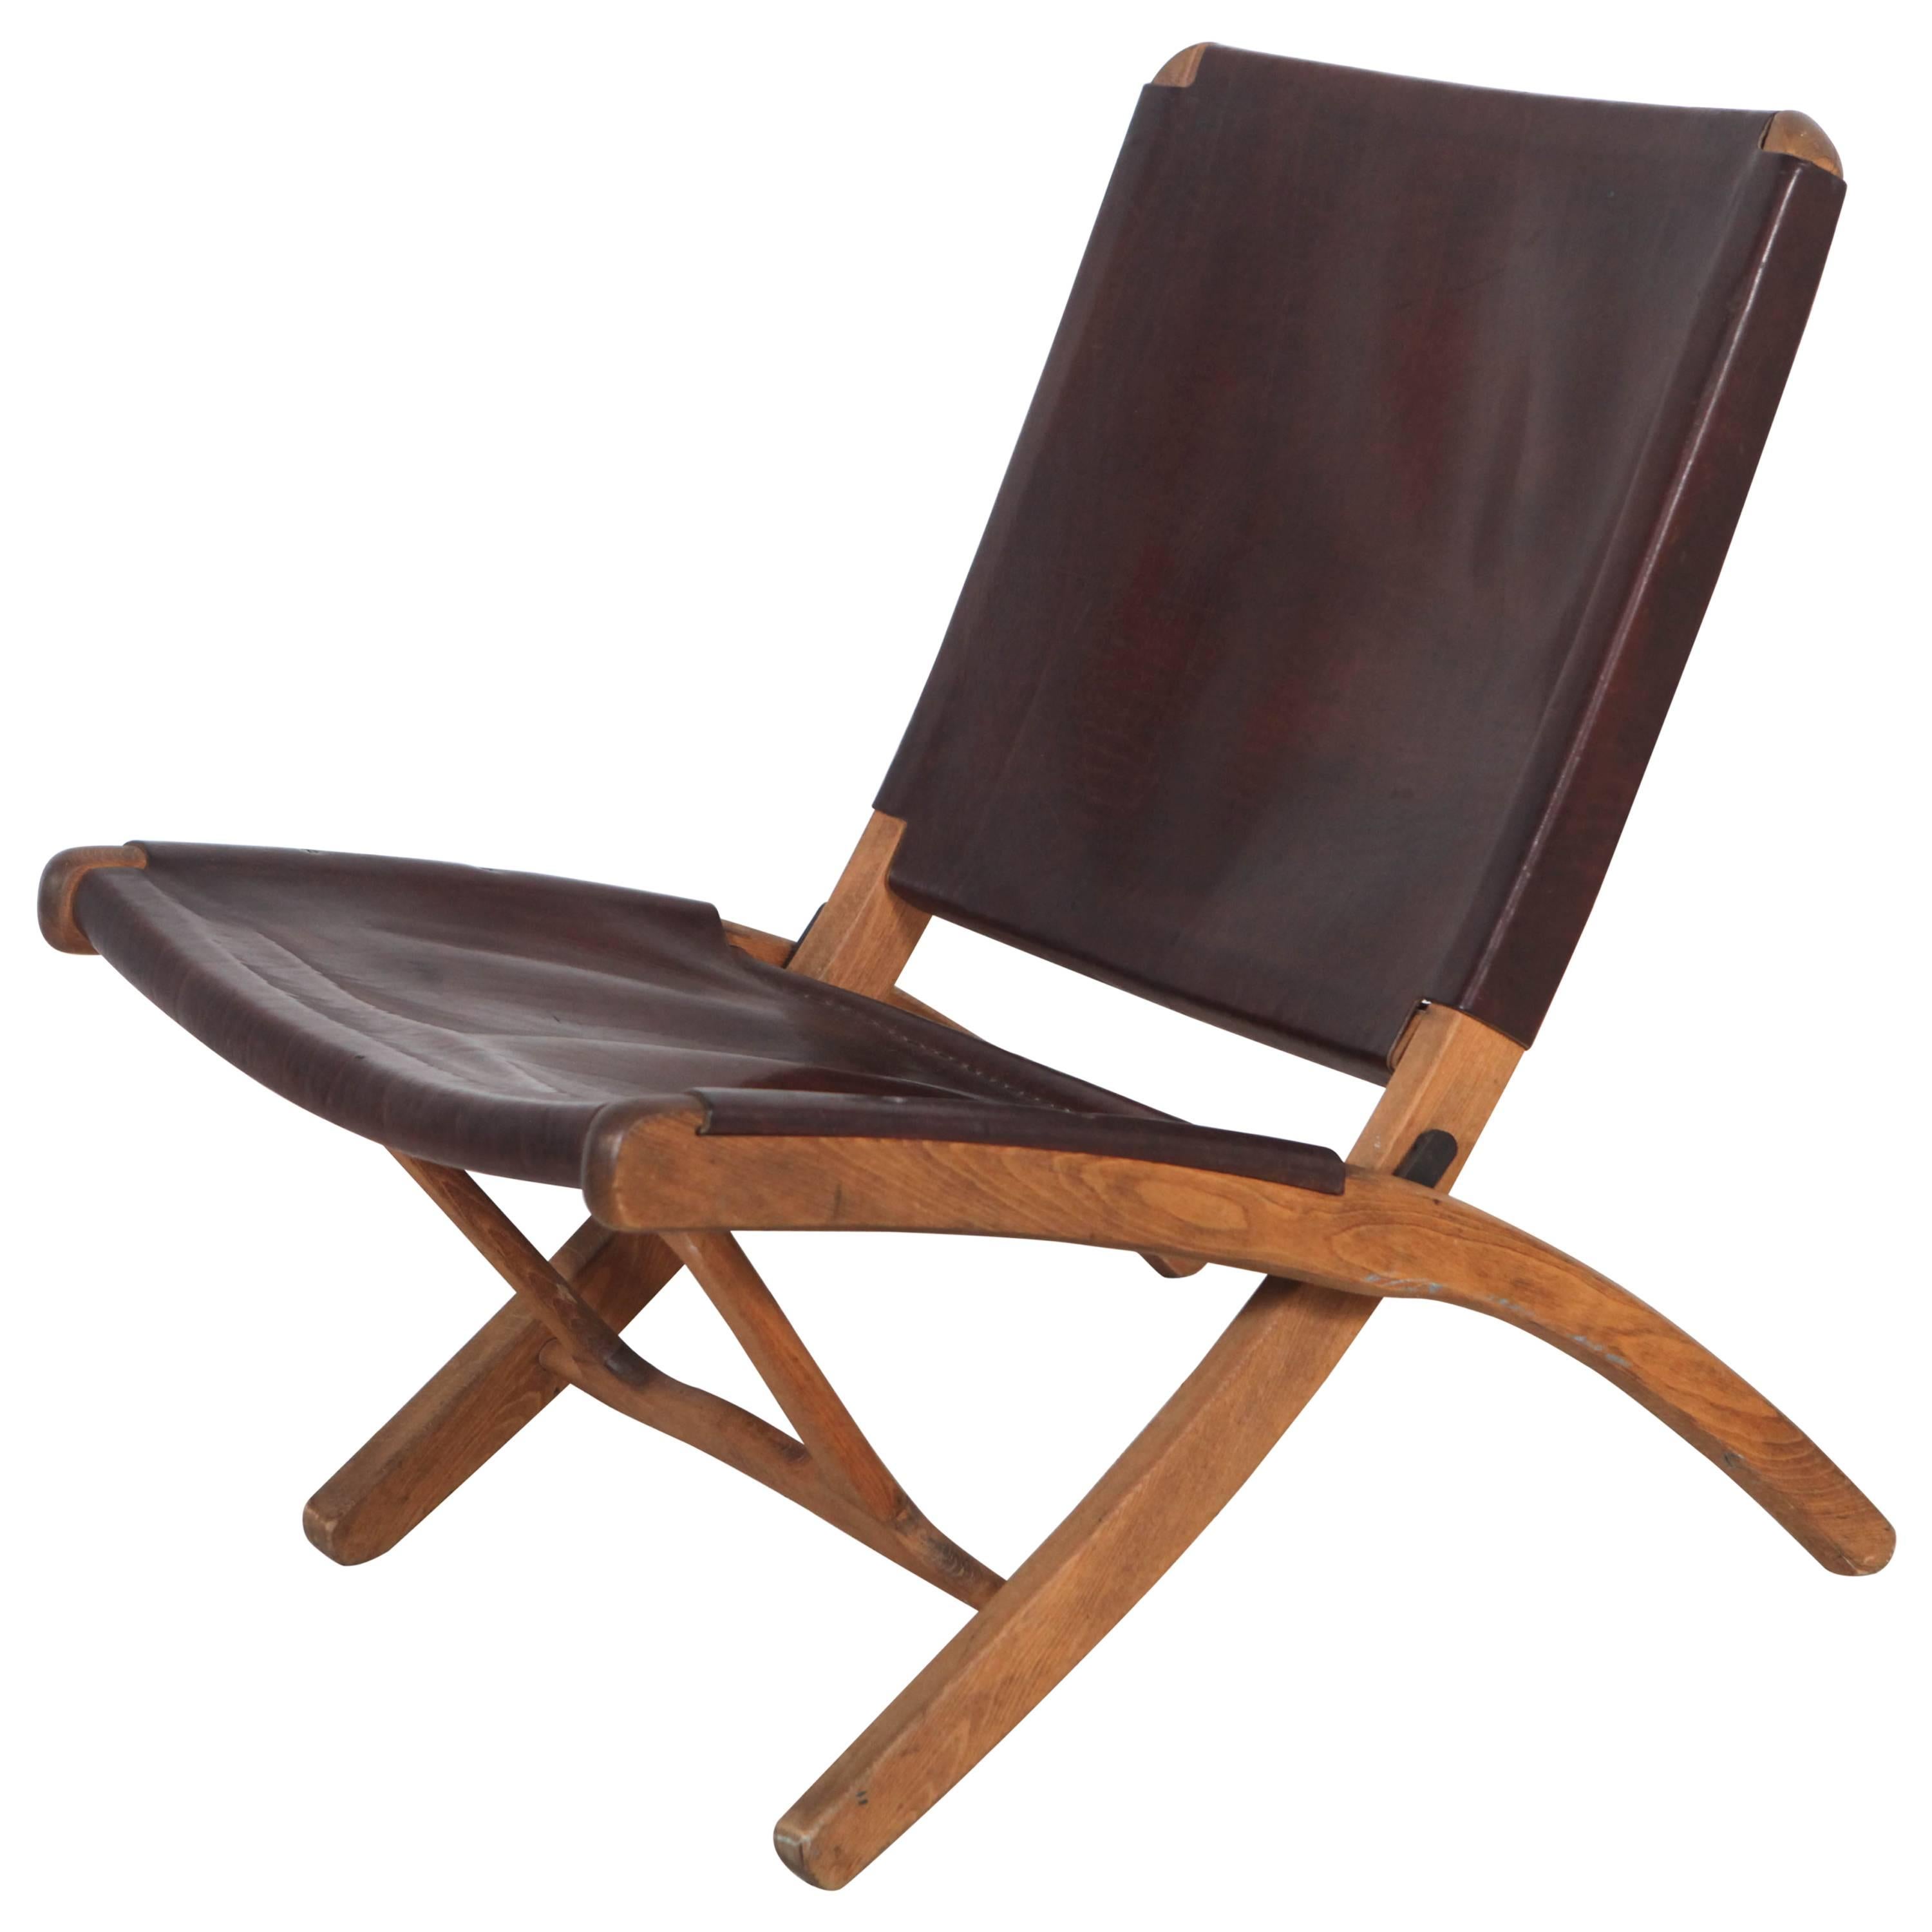 Italian Leather and Wood Folding Chair